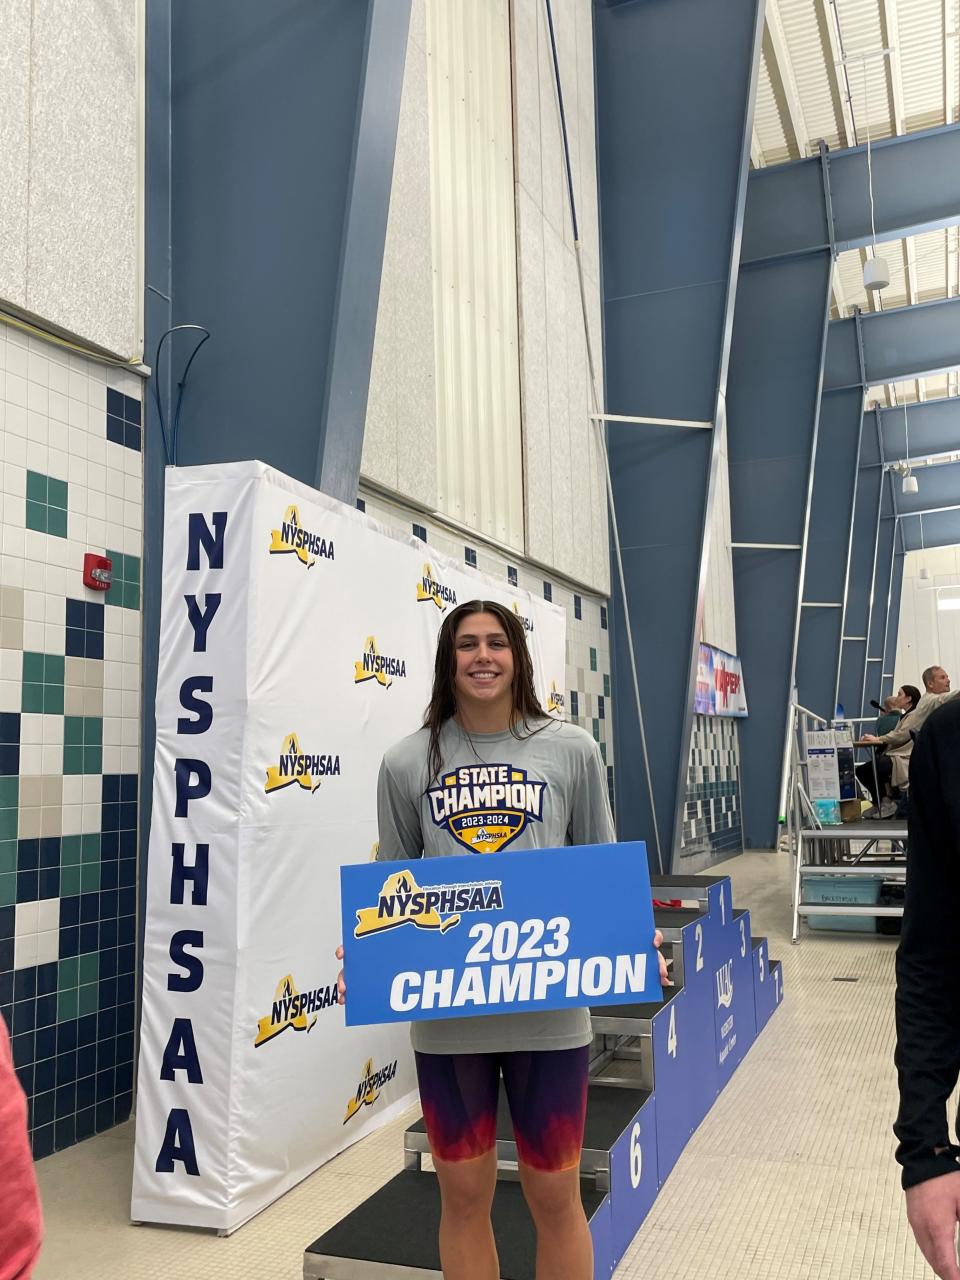 Corning's Angie McKane won the 50-yard freestyle and 100 butterfly at the New York State Girls Swimming and Diving Championships on Nov. 18, 2023 at the Webster Aquatic Center.